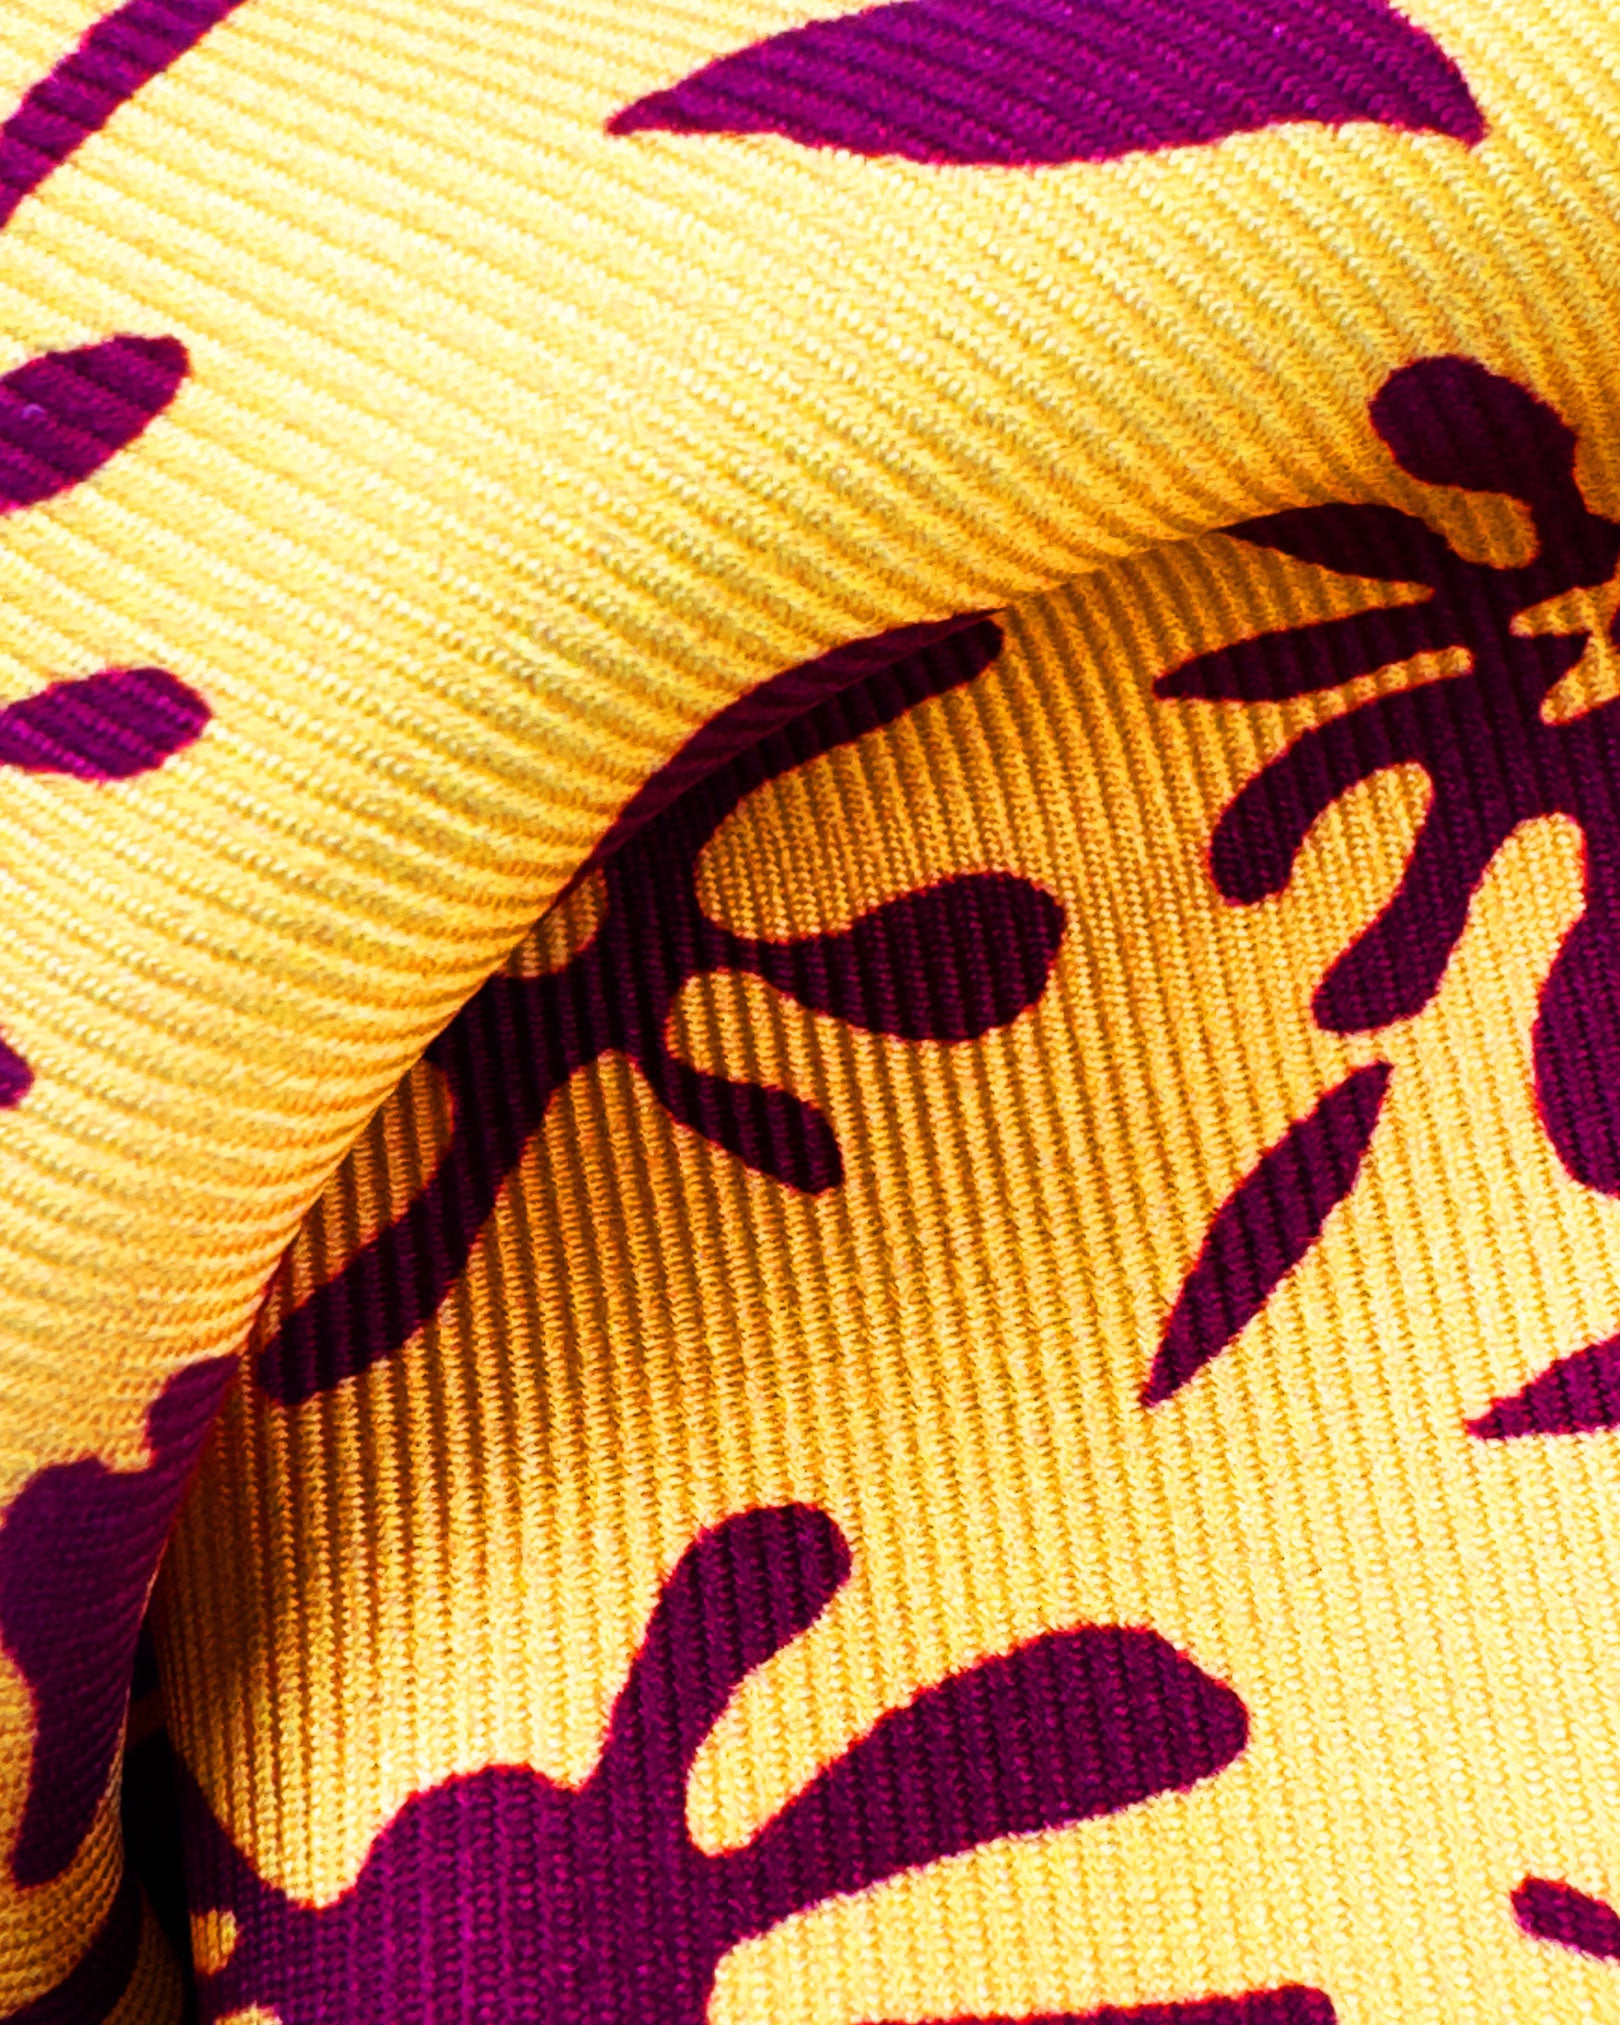 A ruffled close-up of the 'Blenheim' pocket square, presenting a closer view of the floral-inspired patterns against the attractive lustre of the deadstock silk material. 